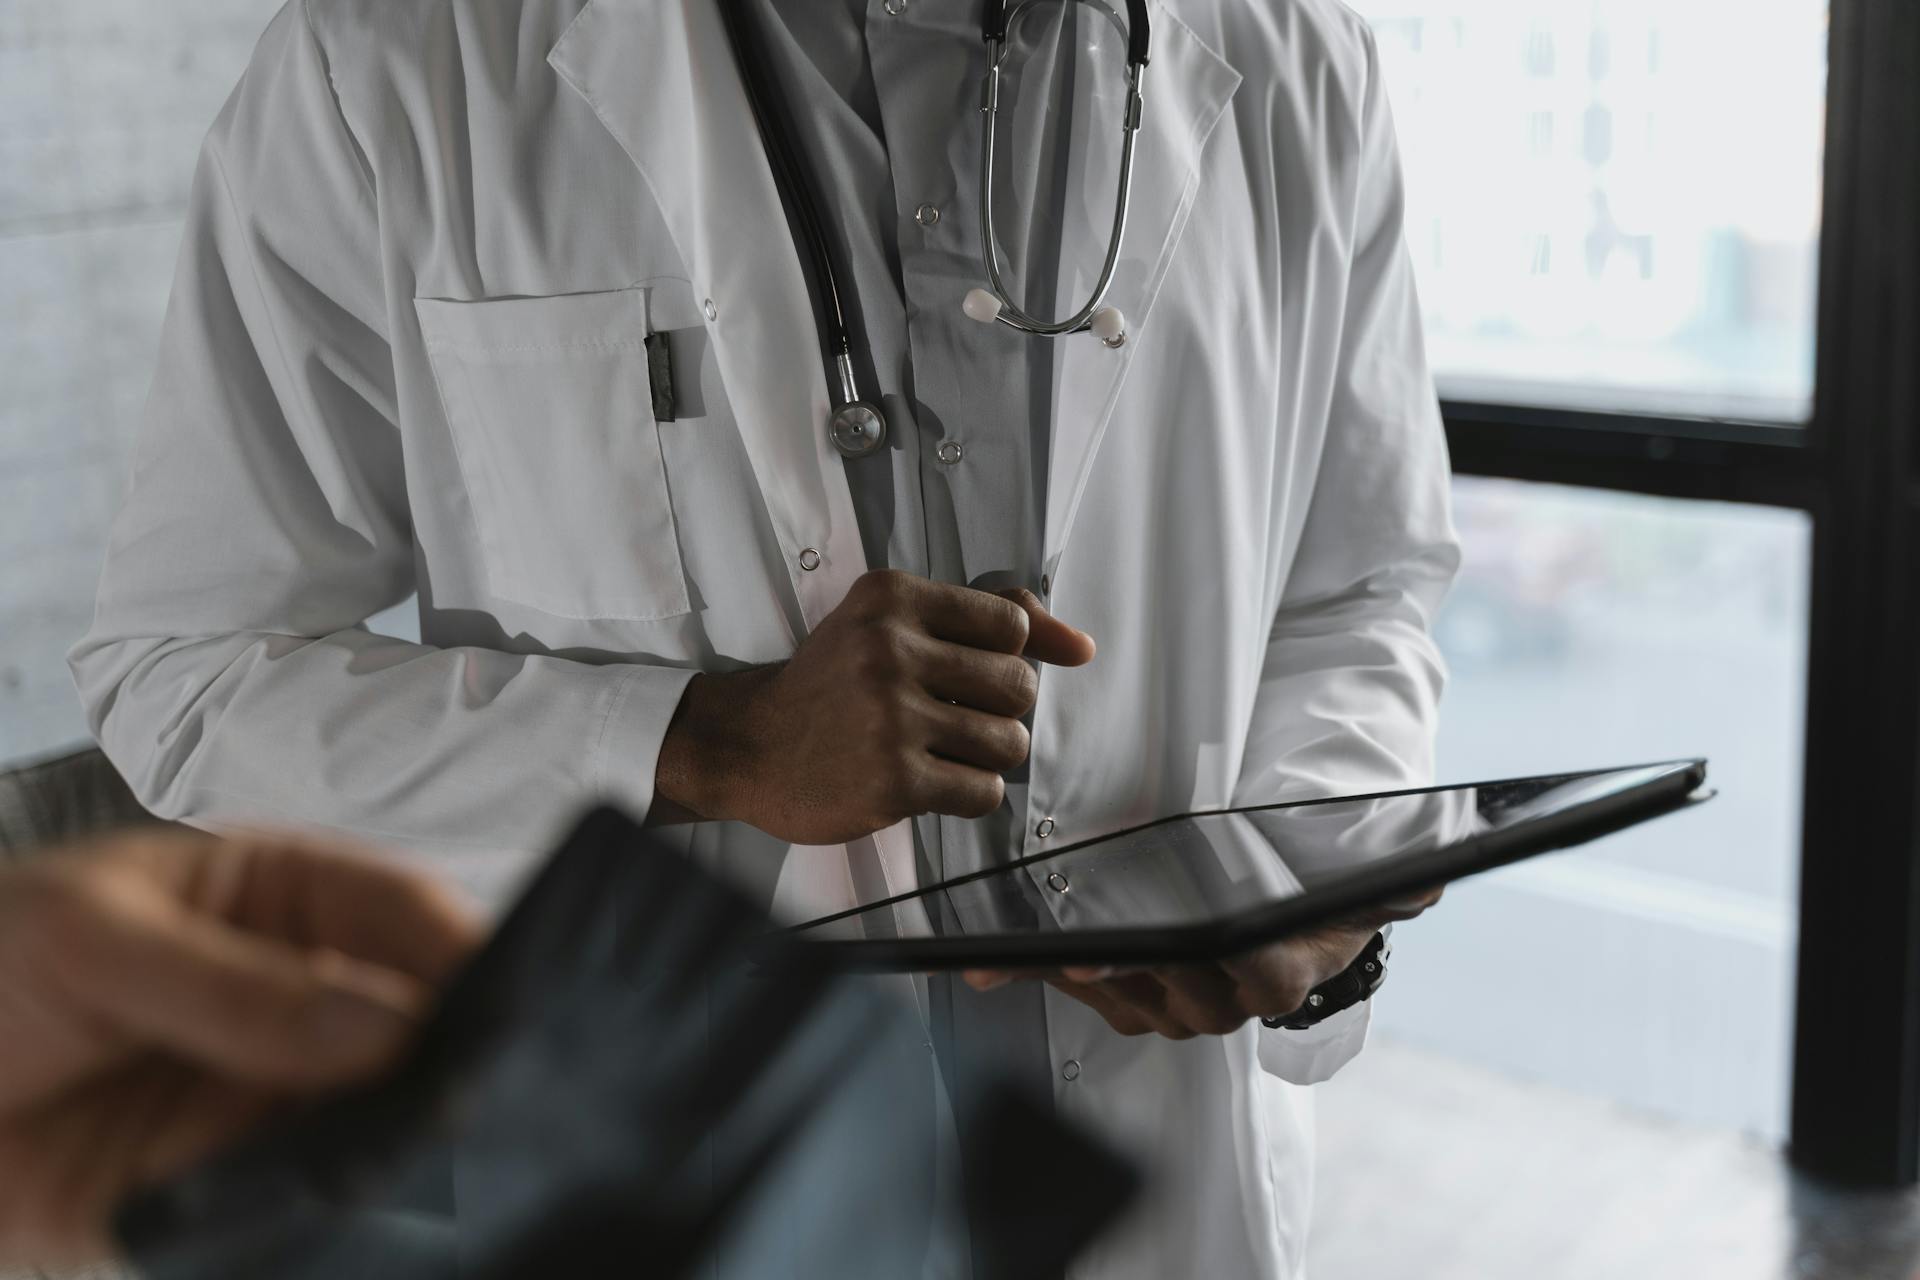 A doctor holding a tablet | Source: Pexels